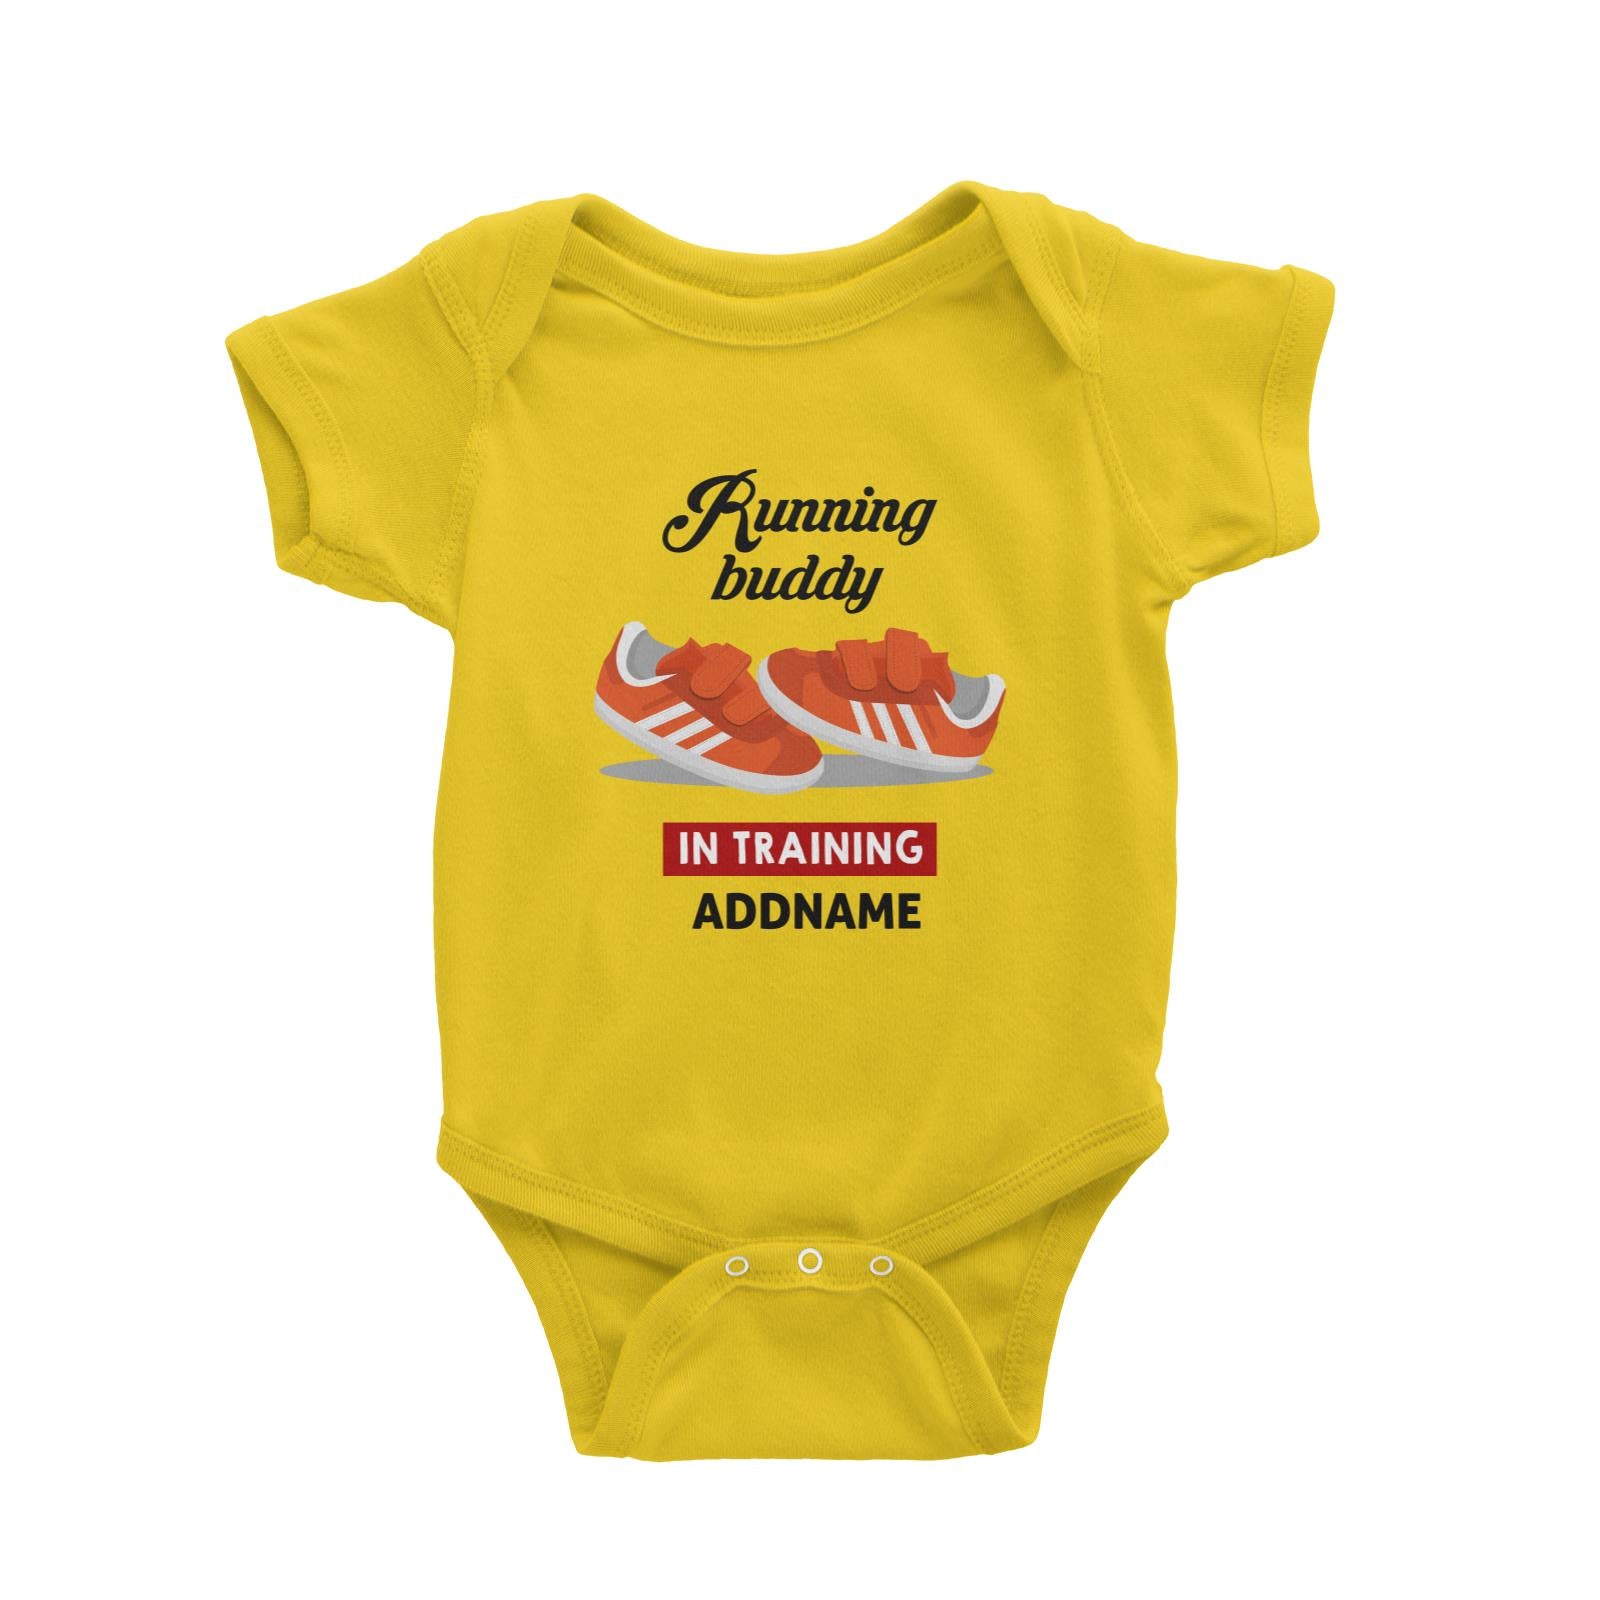 Running Buddy in Training Addname with Shoes Baby Romper Personalizable Designs Basic Newborn